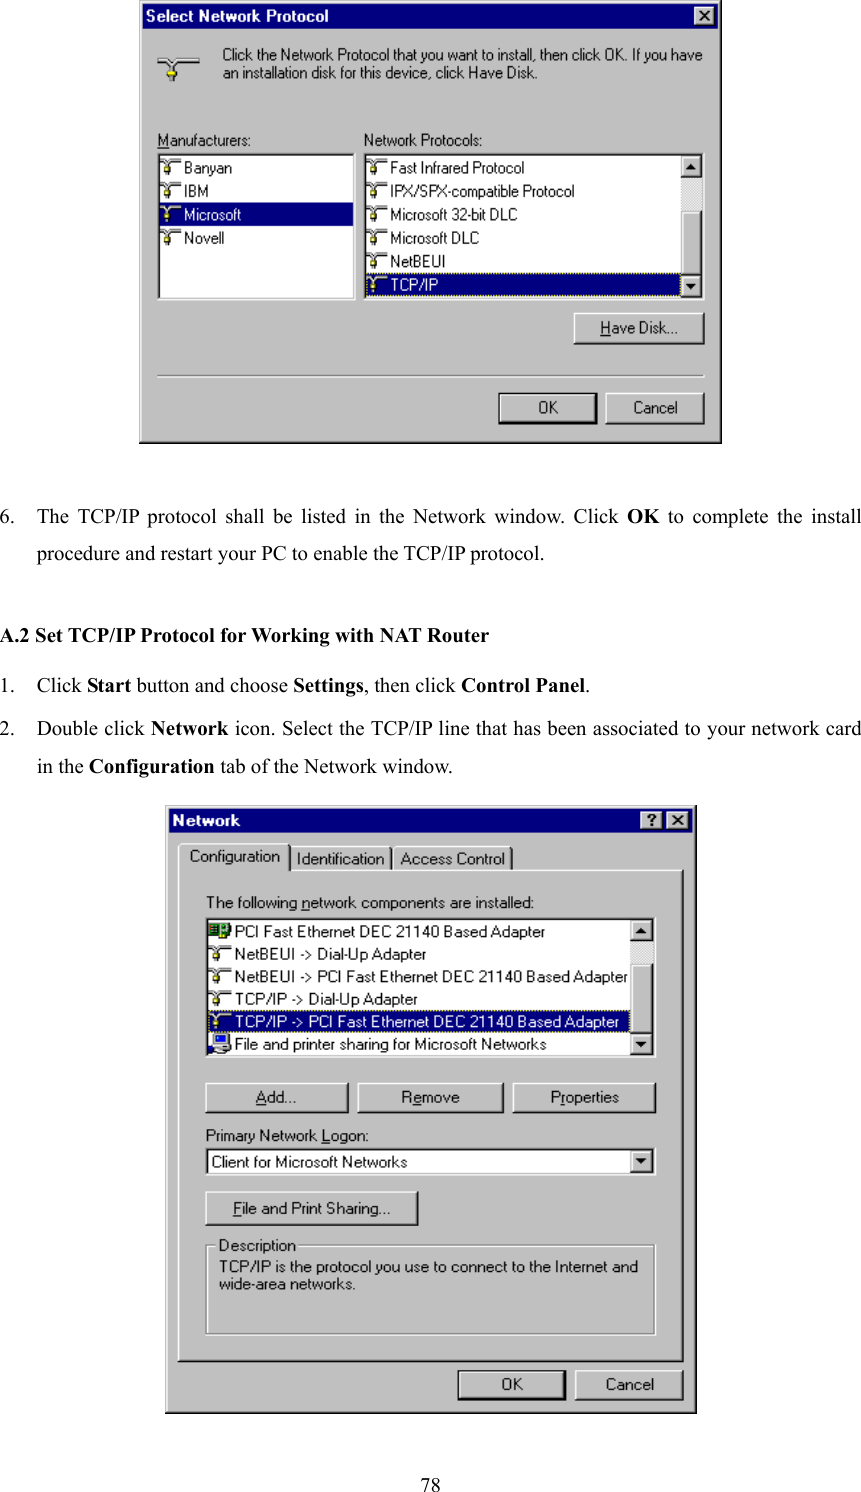  78  6. The TCP/IP protocol shall be listed in the Network window. Click OK to complete the install procedure and restart your PC to enable the TCP/IP protocol.  A.2 Set TCP/IP Protocol for Working with NAT Router 1. Click Start button and choose Settings, then click Control Panel. 2. Double click Network icon. Select the TCP/IP line that has been associated to your network card in the Configuration tab of the Network window.  